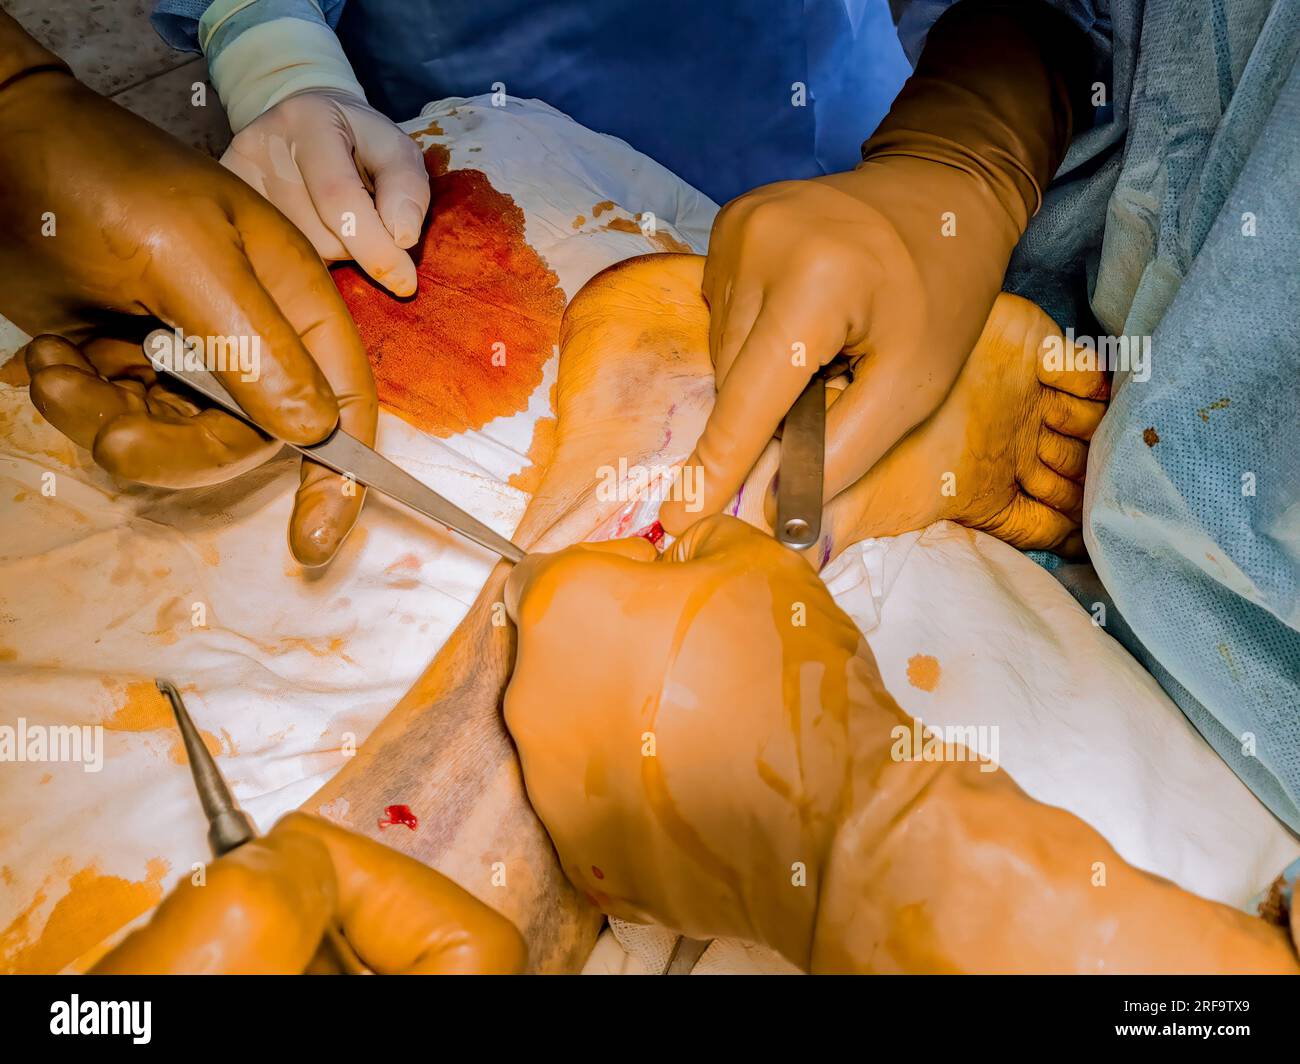 Doctors perform surgical procedure to place metal plate after leg fracture. Stock Photo